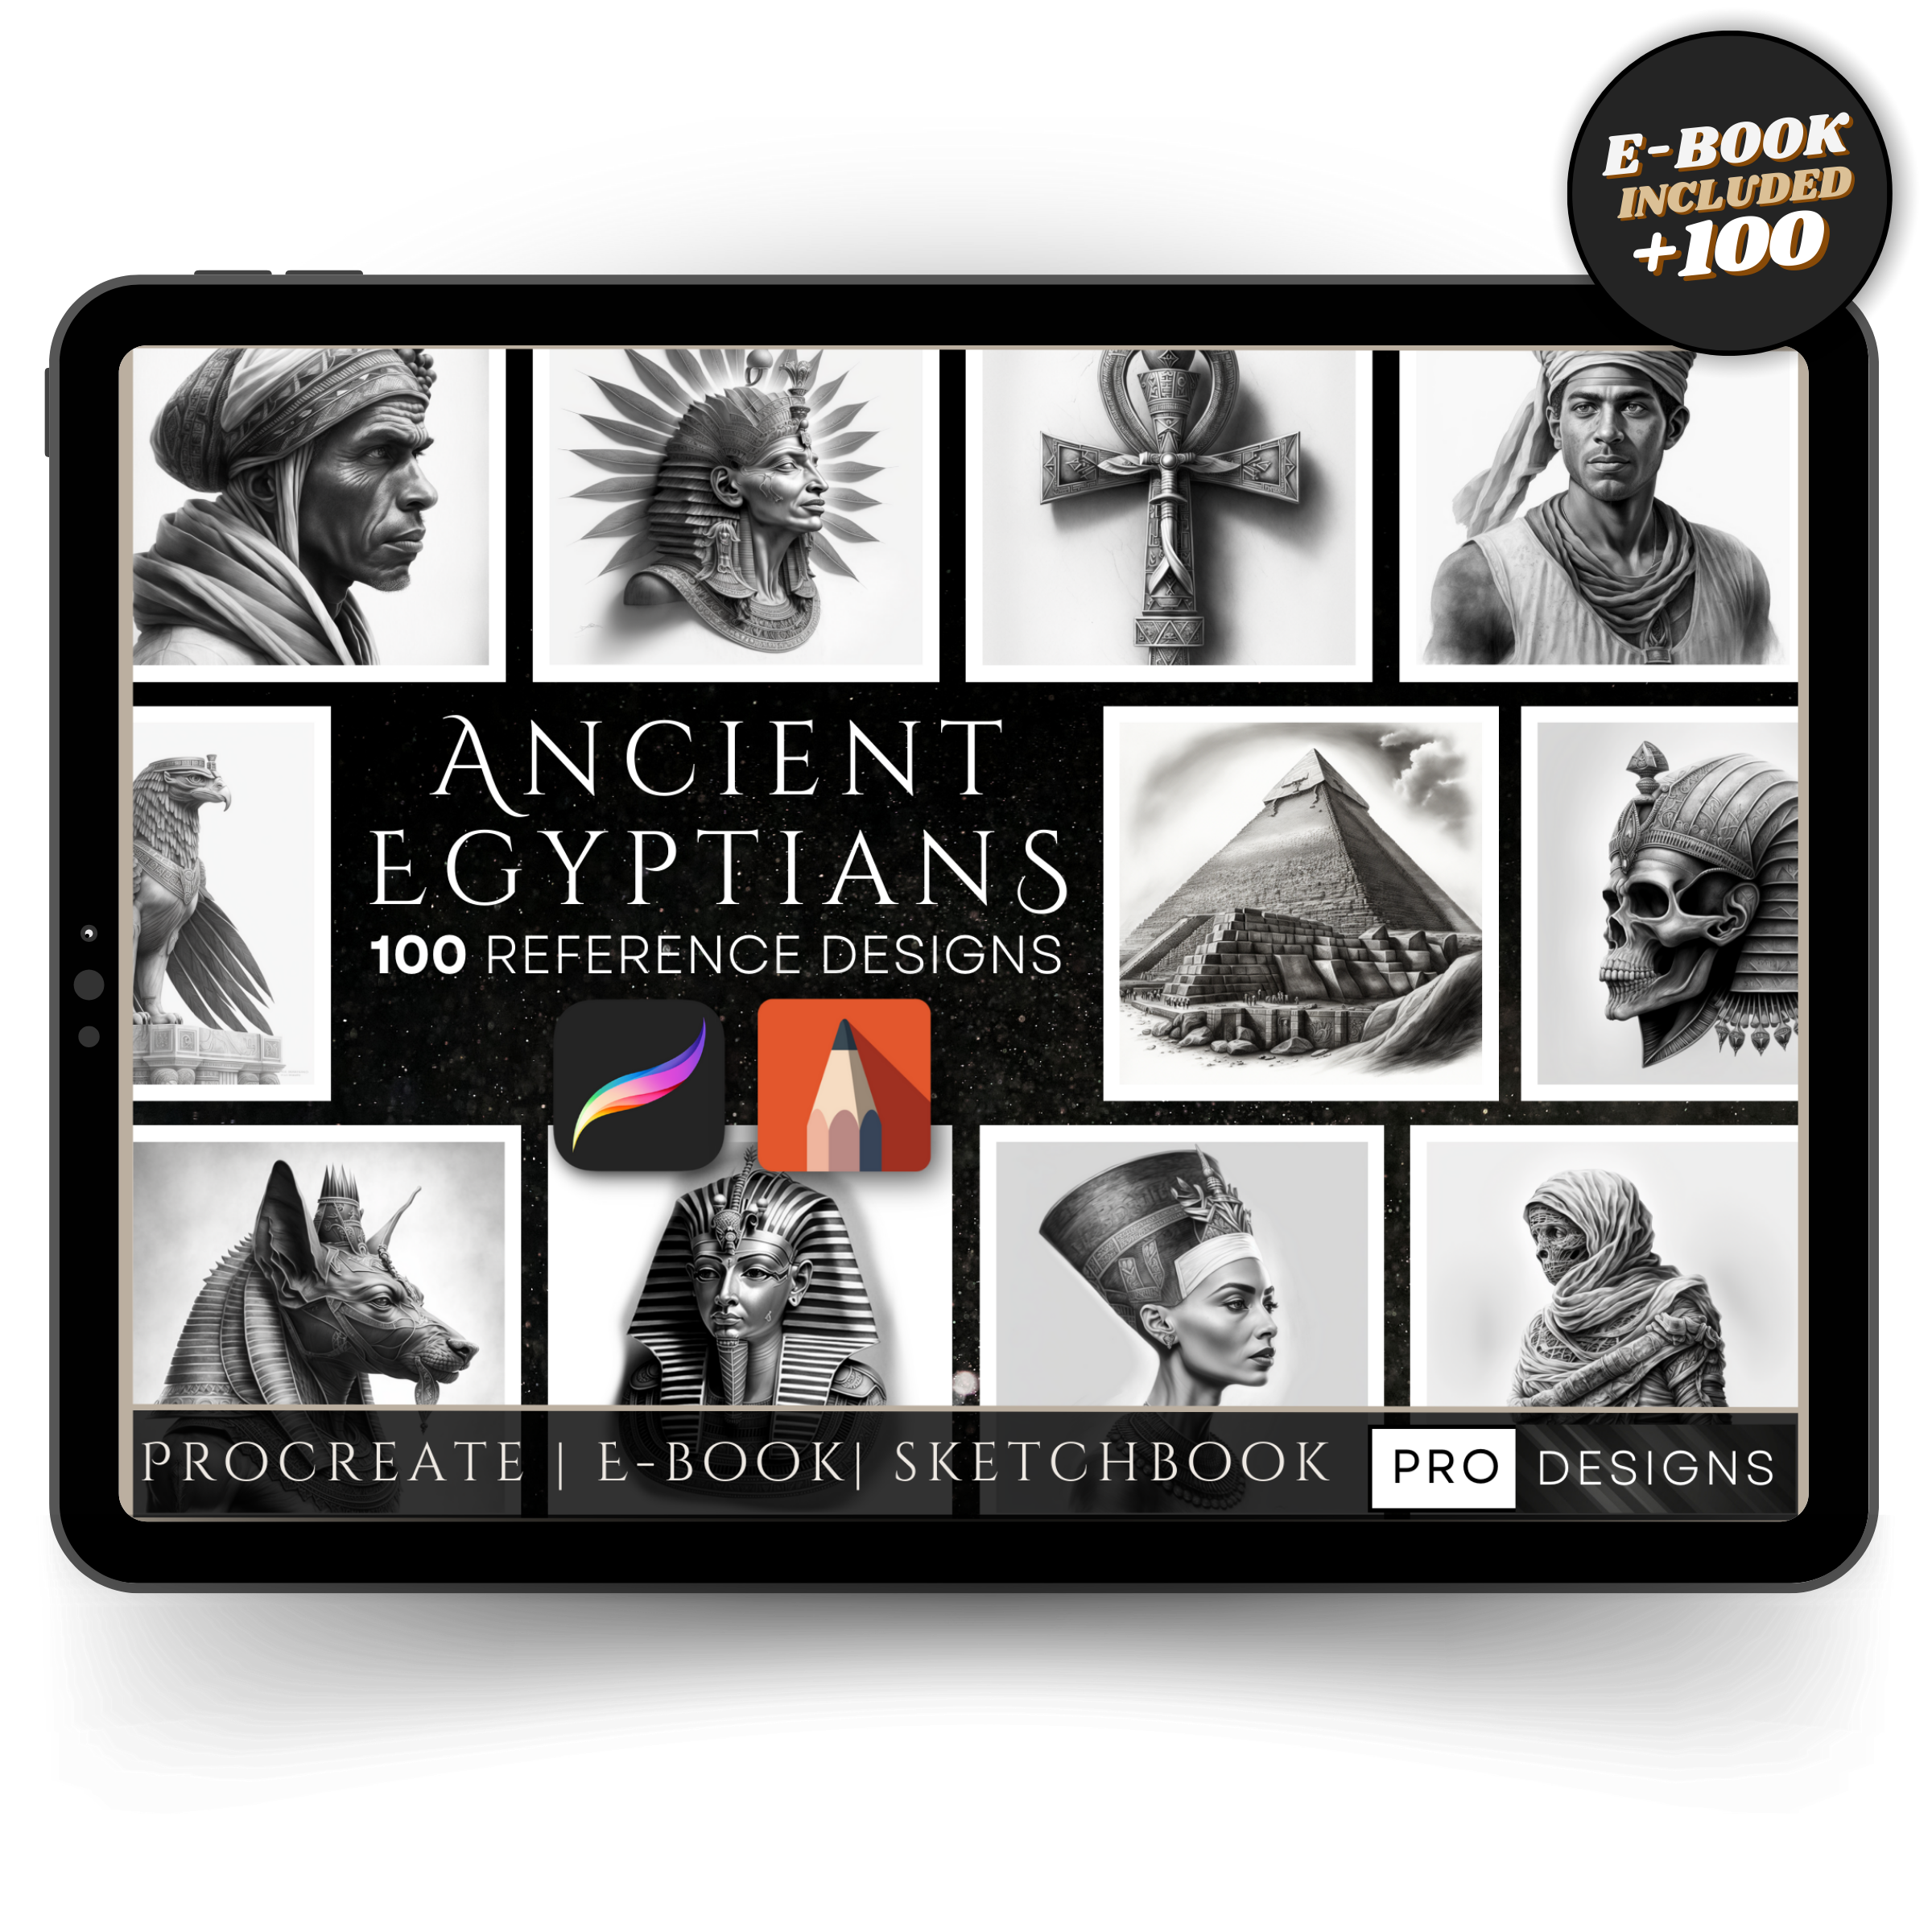 Ancient Egyptian" - Unearth the Secrets of Timeless Artistry